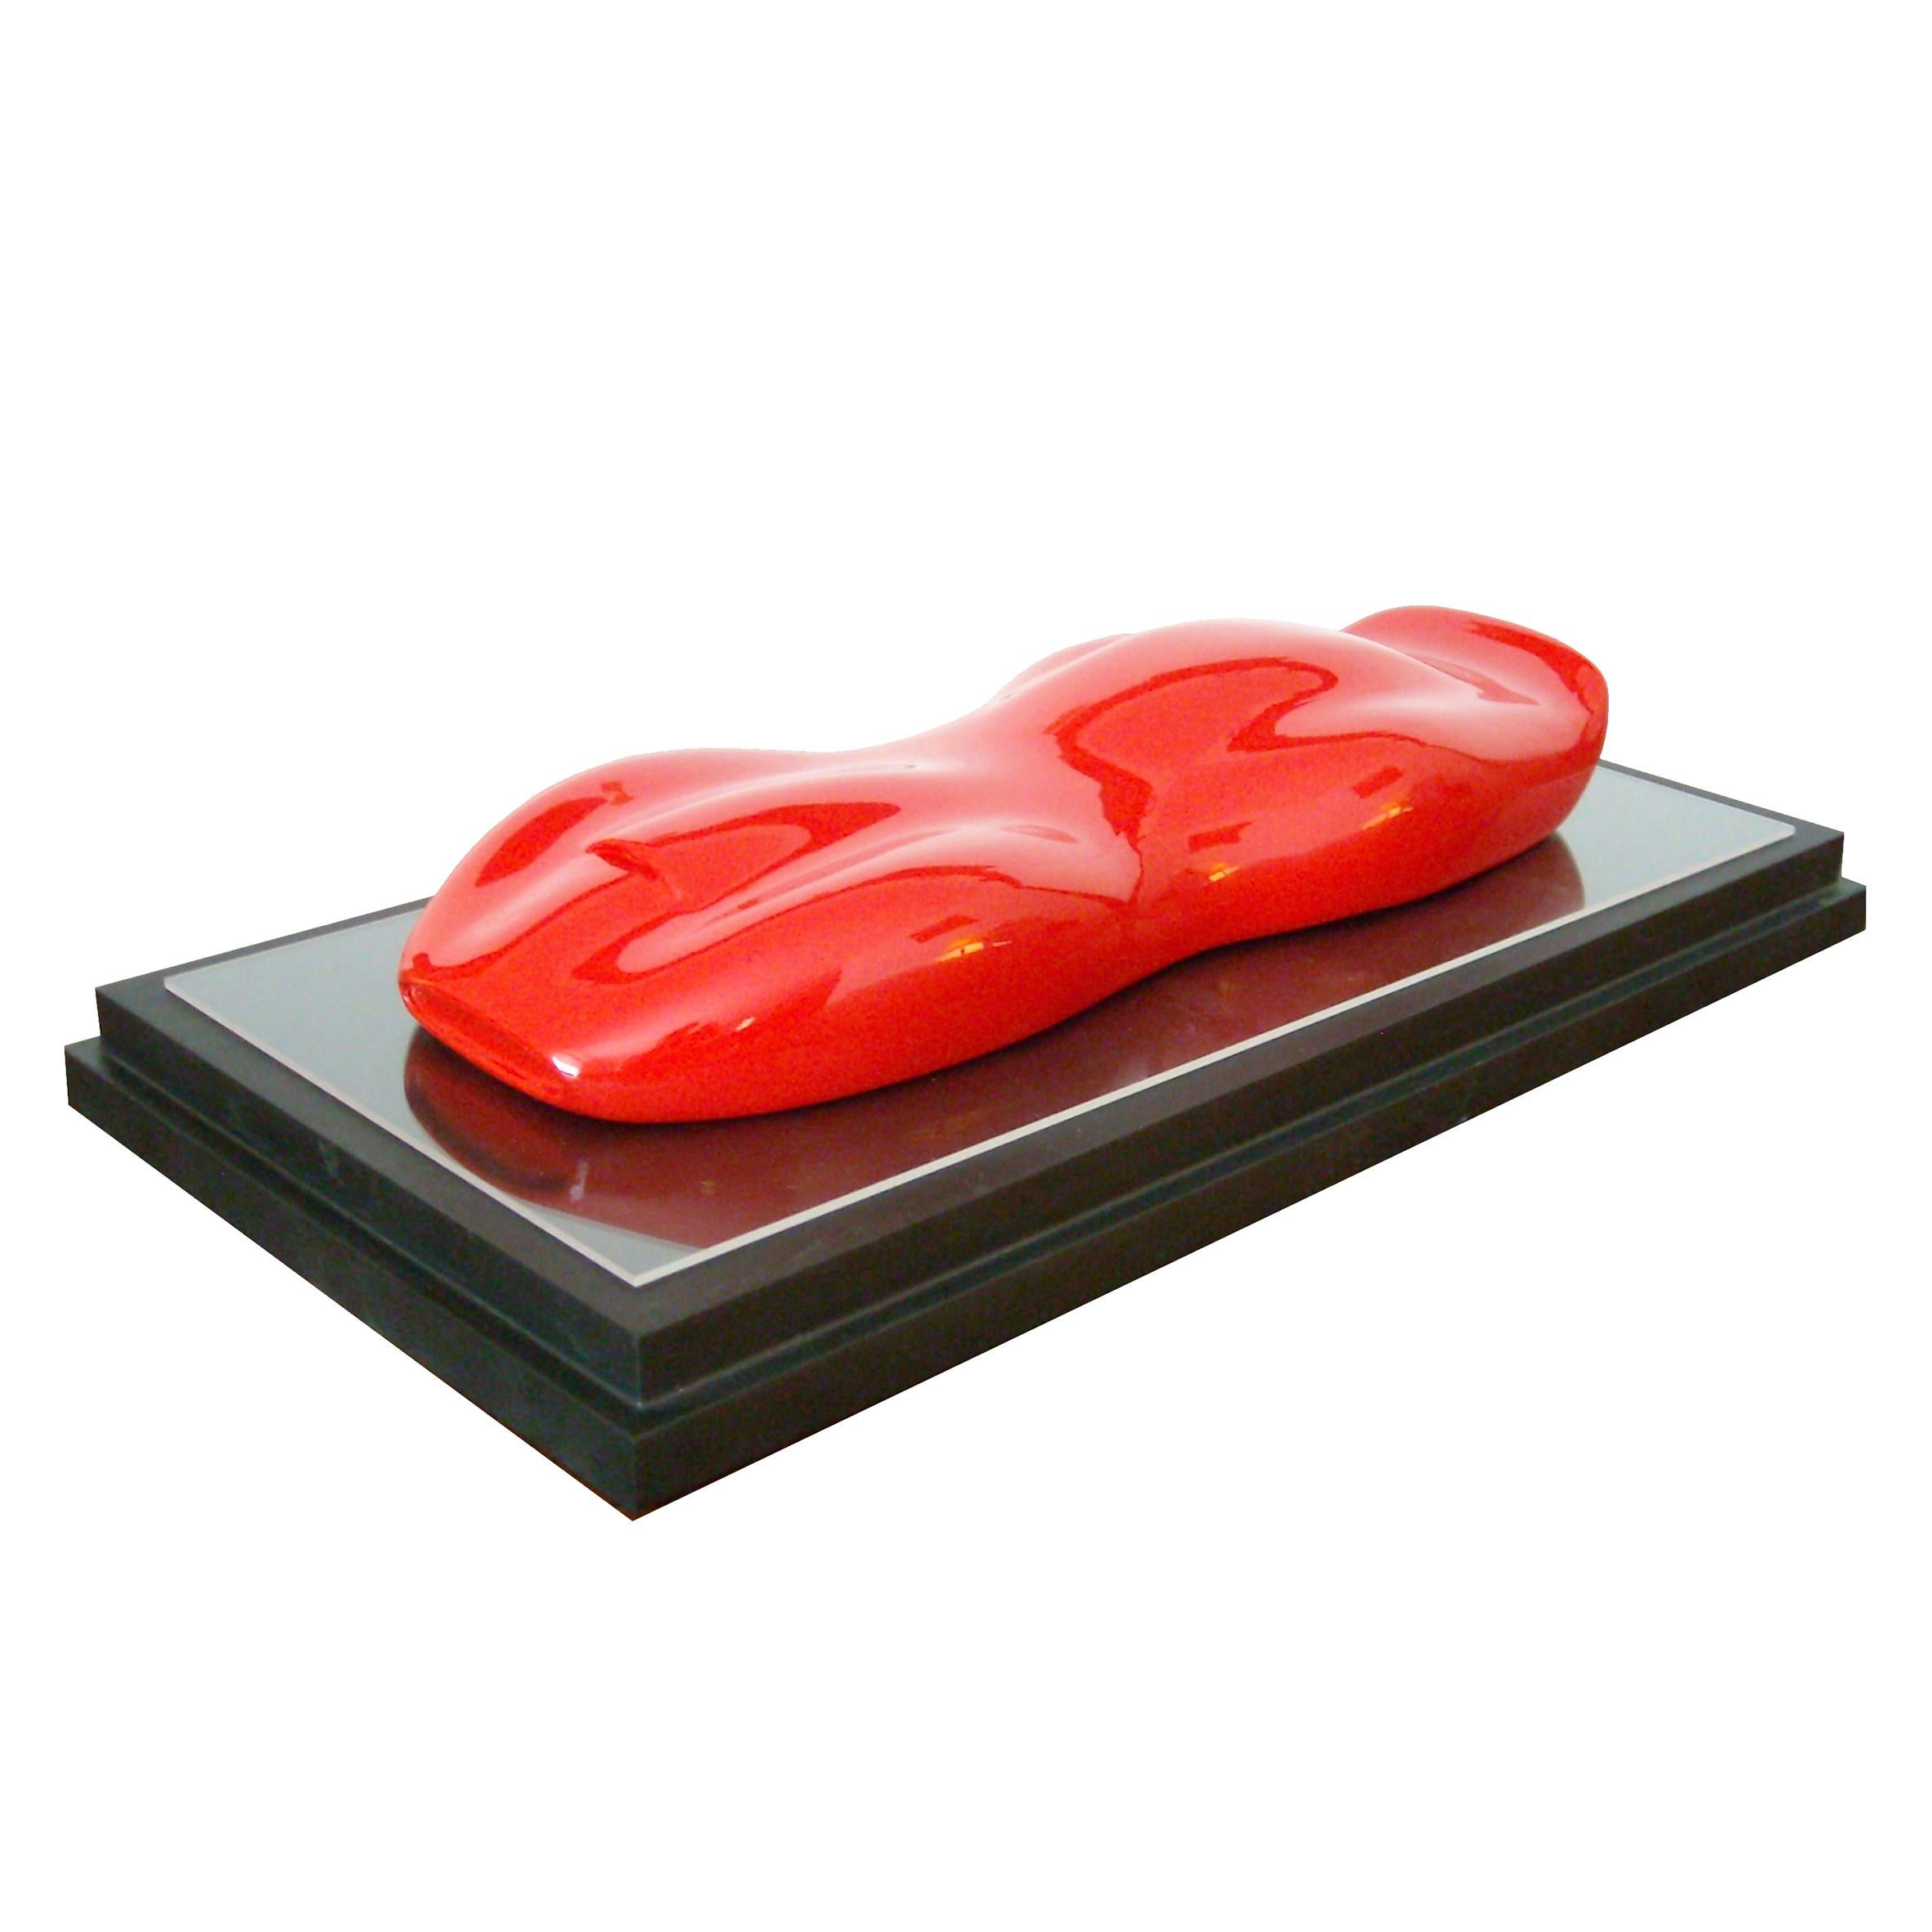 Modena

A red lacquered and varnished marble composite model of a racing car.
On a dark lacquered rectangular wood base.

Belzoni finds inspiration in the legendary racing cars of the 1950s and the 1960s.
His elegant sculptures epitomize the